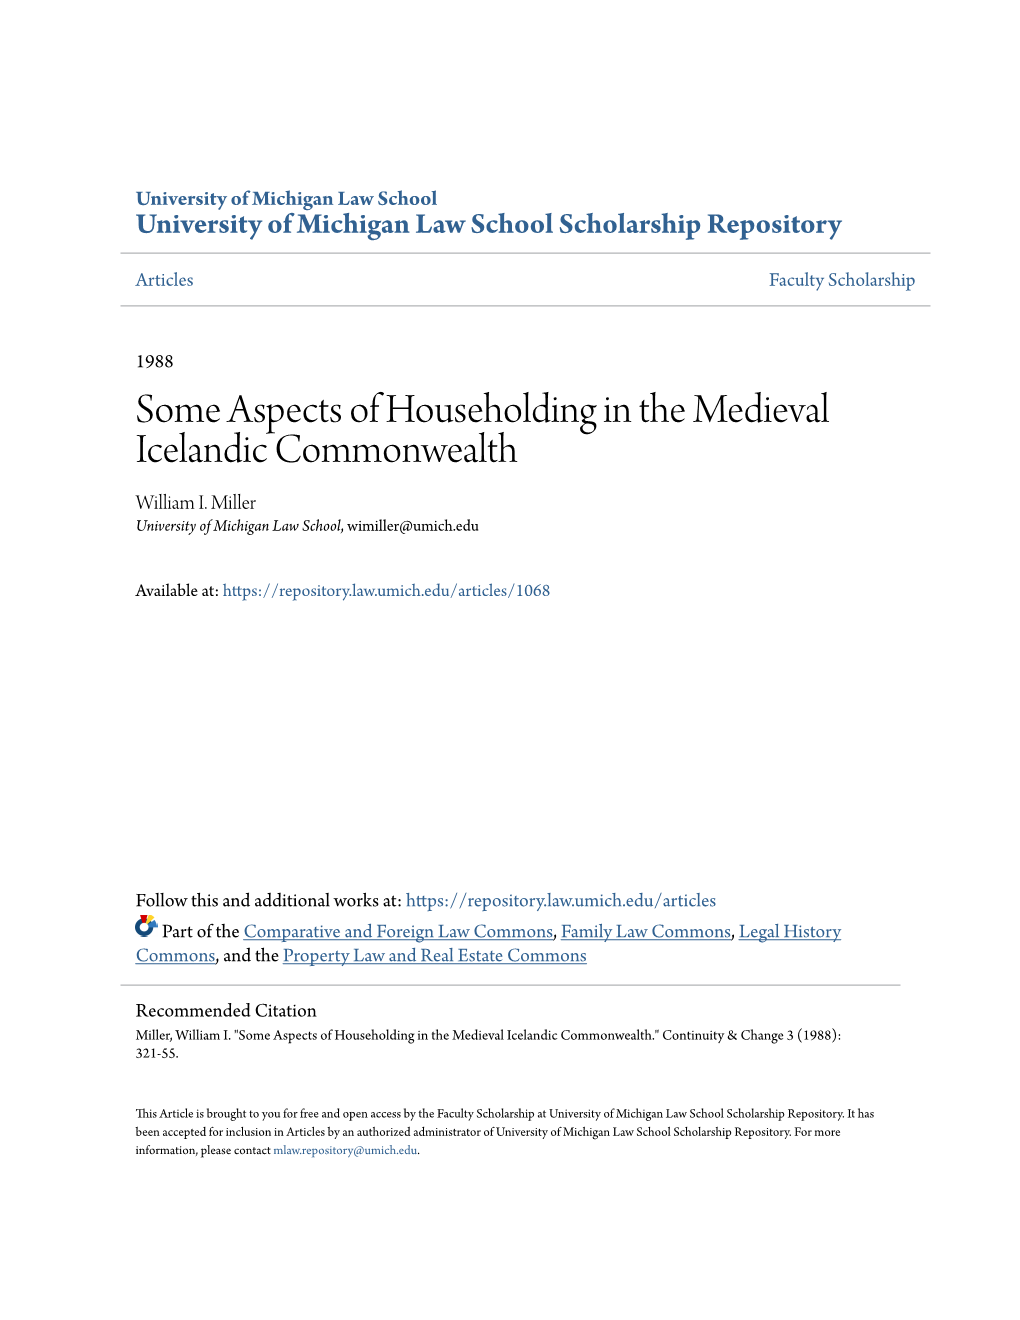 Some Aspects of Householding in the Medieval Icelandic Commonwealth William I